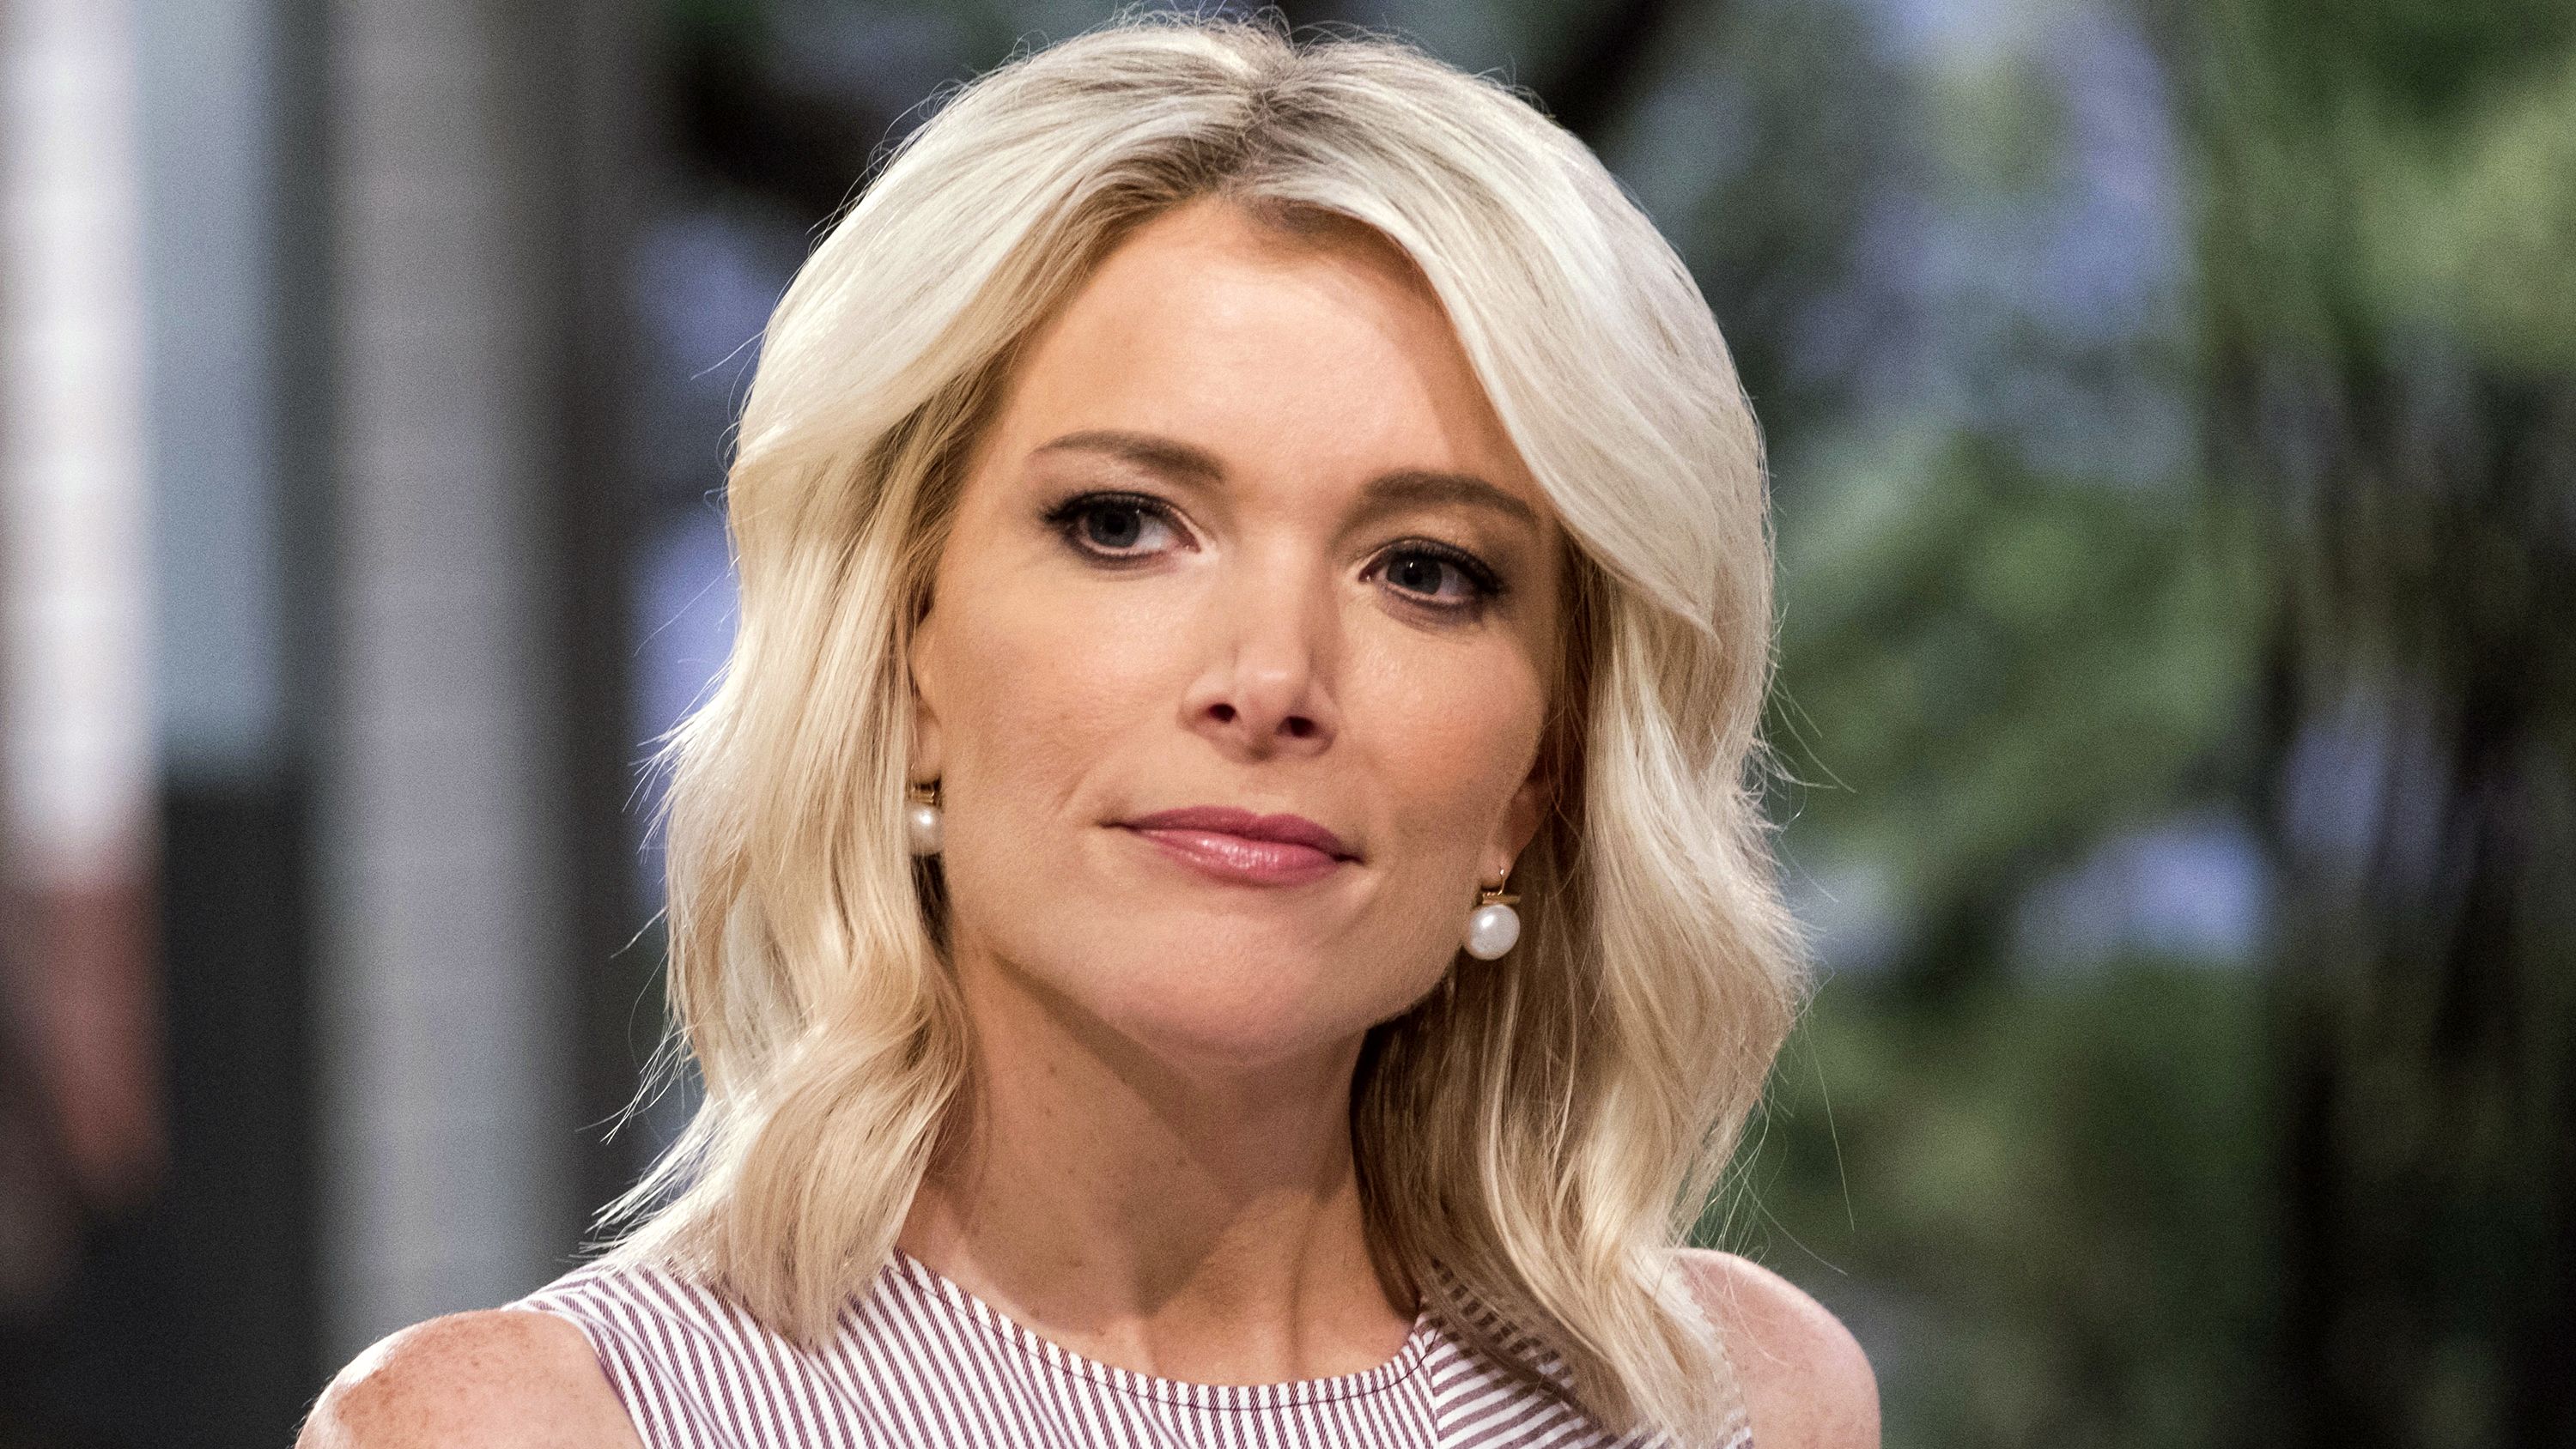 Fox News' Megyn Kelly reveals the 'personal surprise' is a new